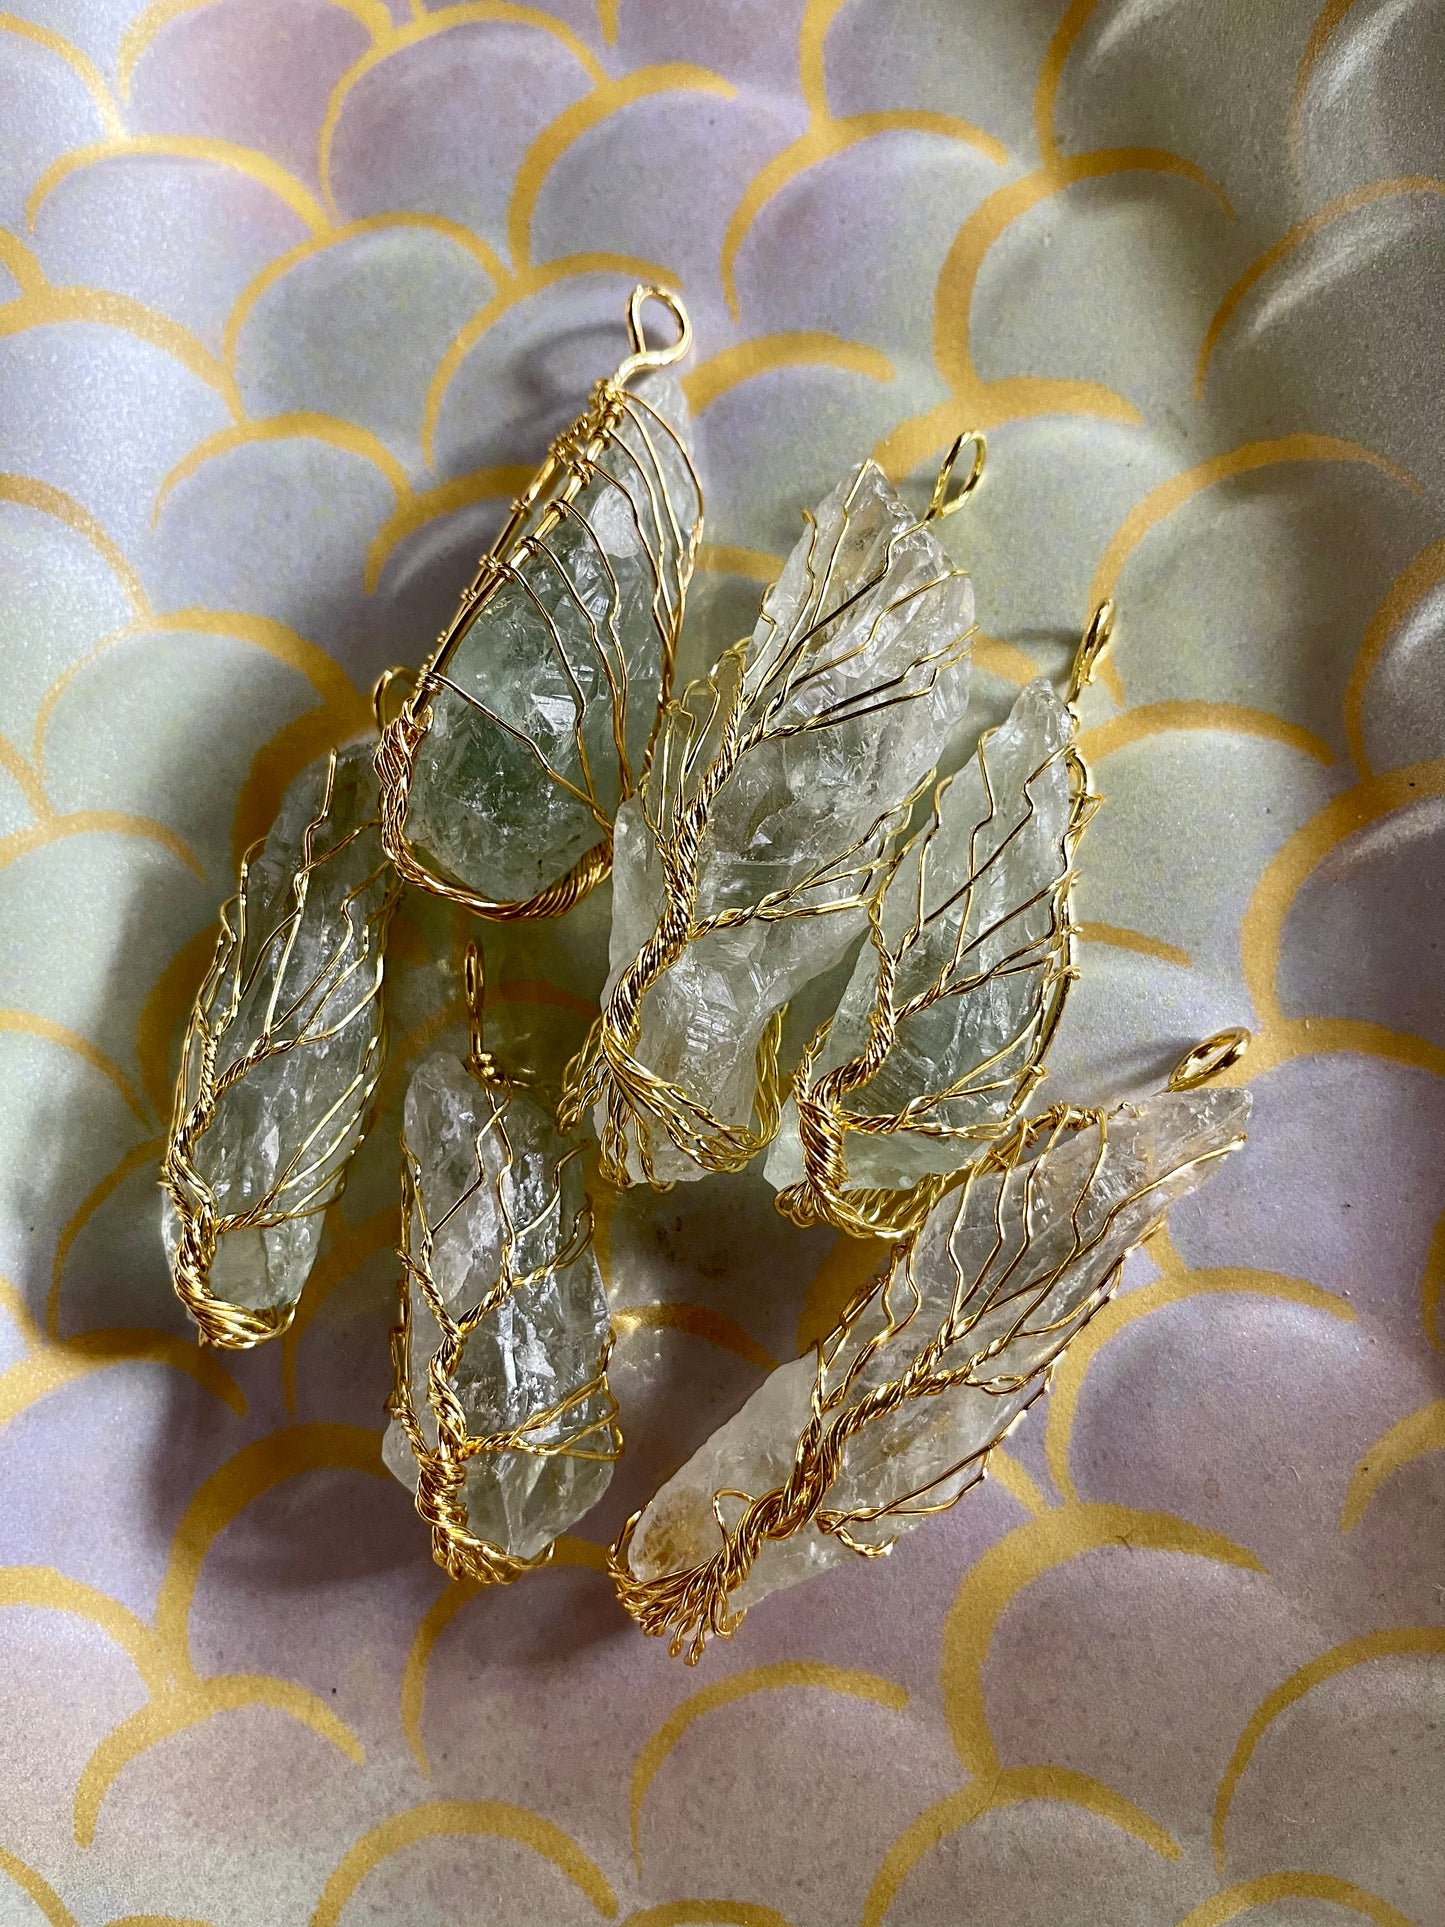 Beautiful Tree of Life Golden Wire Wrapped Pariosilite Crystals, Bodhi Crystal Magic